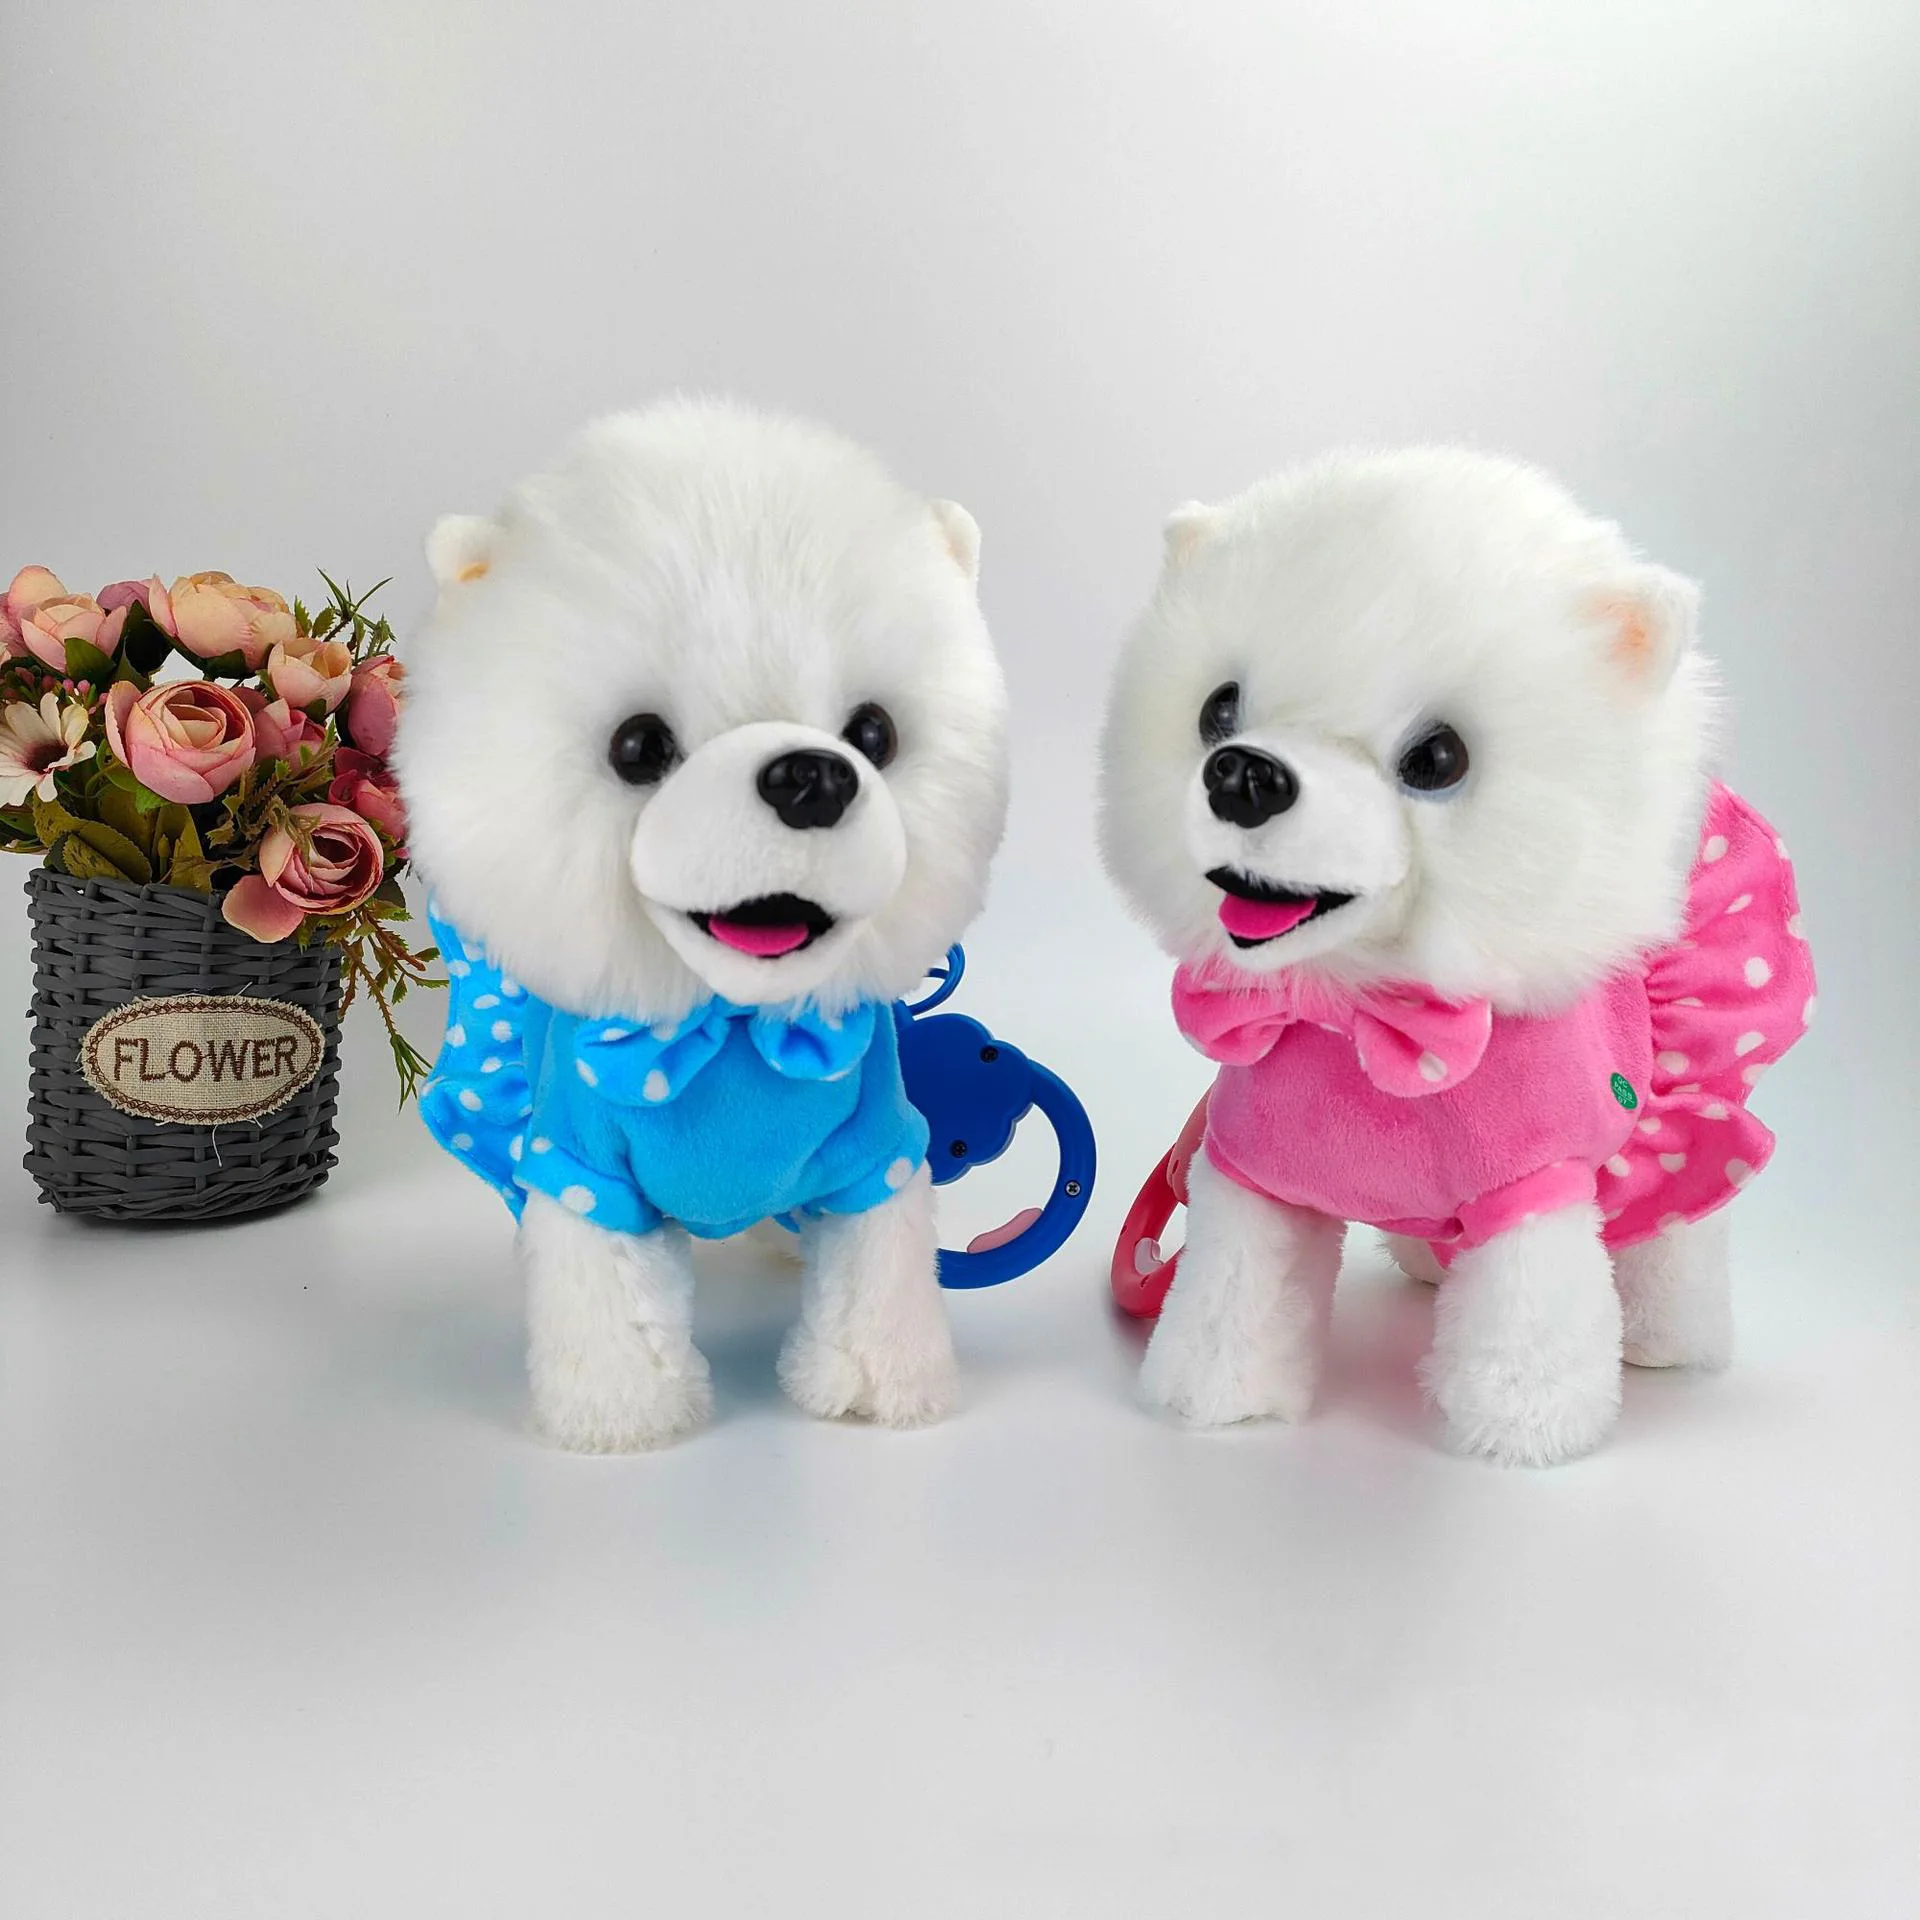 Interactive Puppy Dog, Cute Electronic Plush Dog for Home